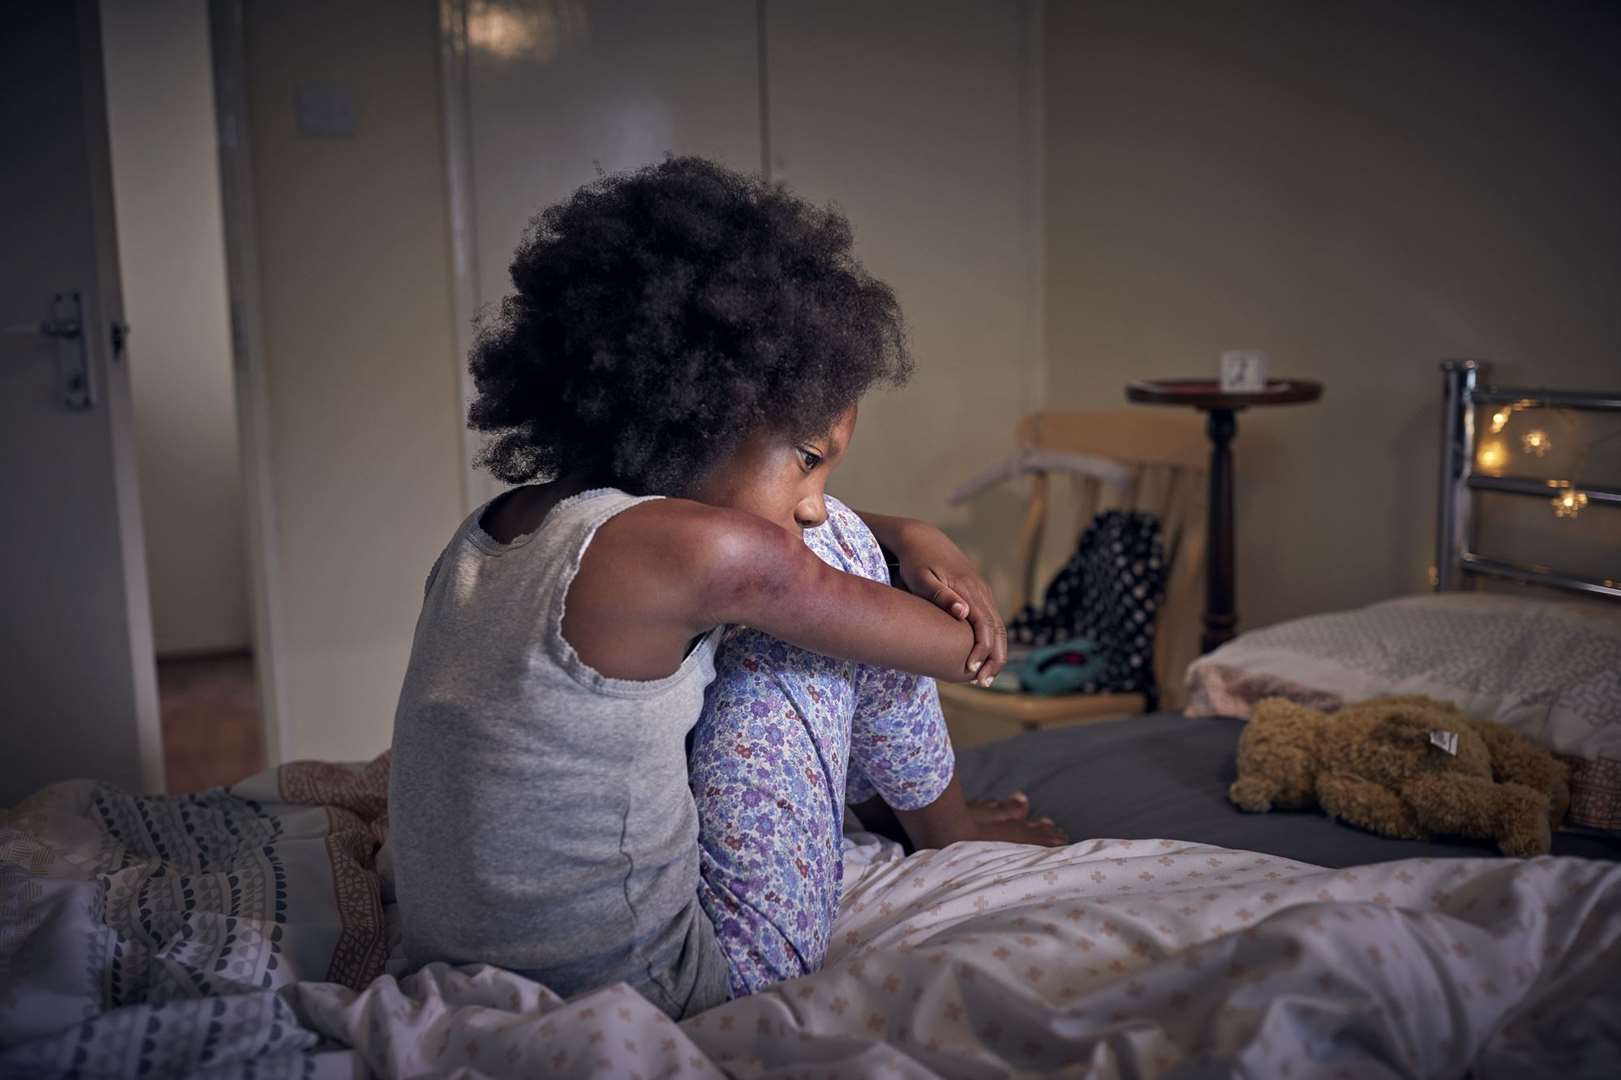 An image from an NSPCC neglect campaign